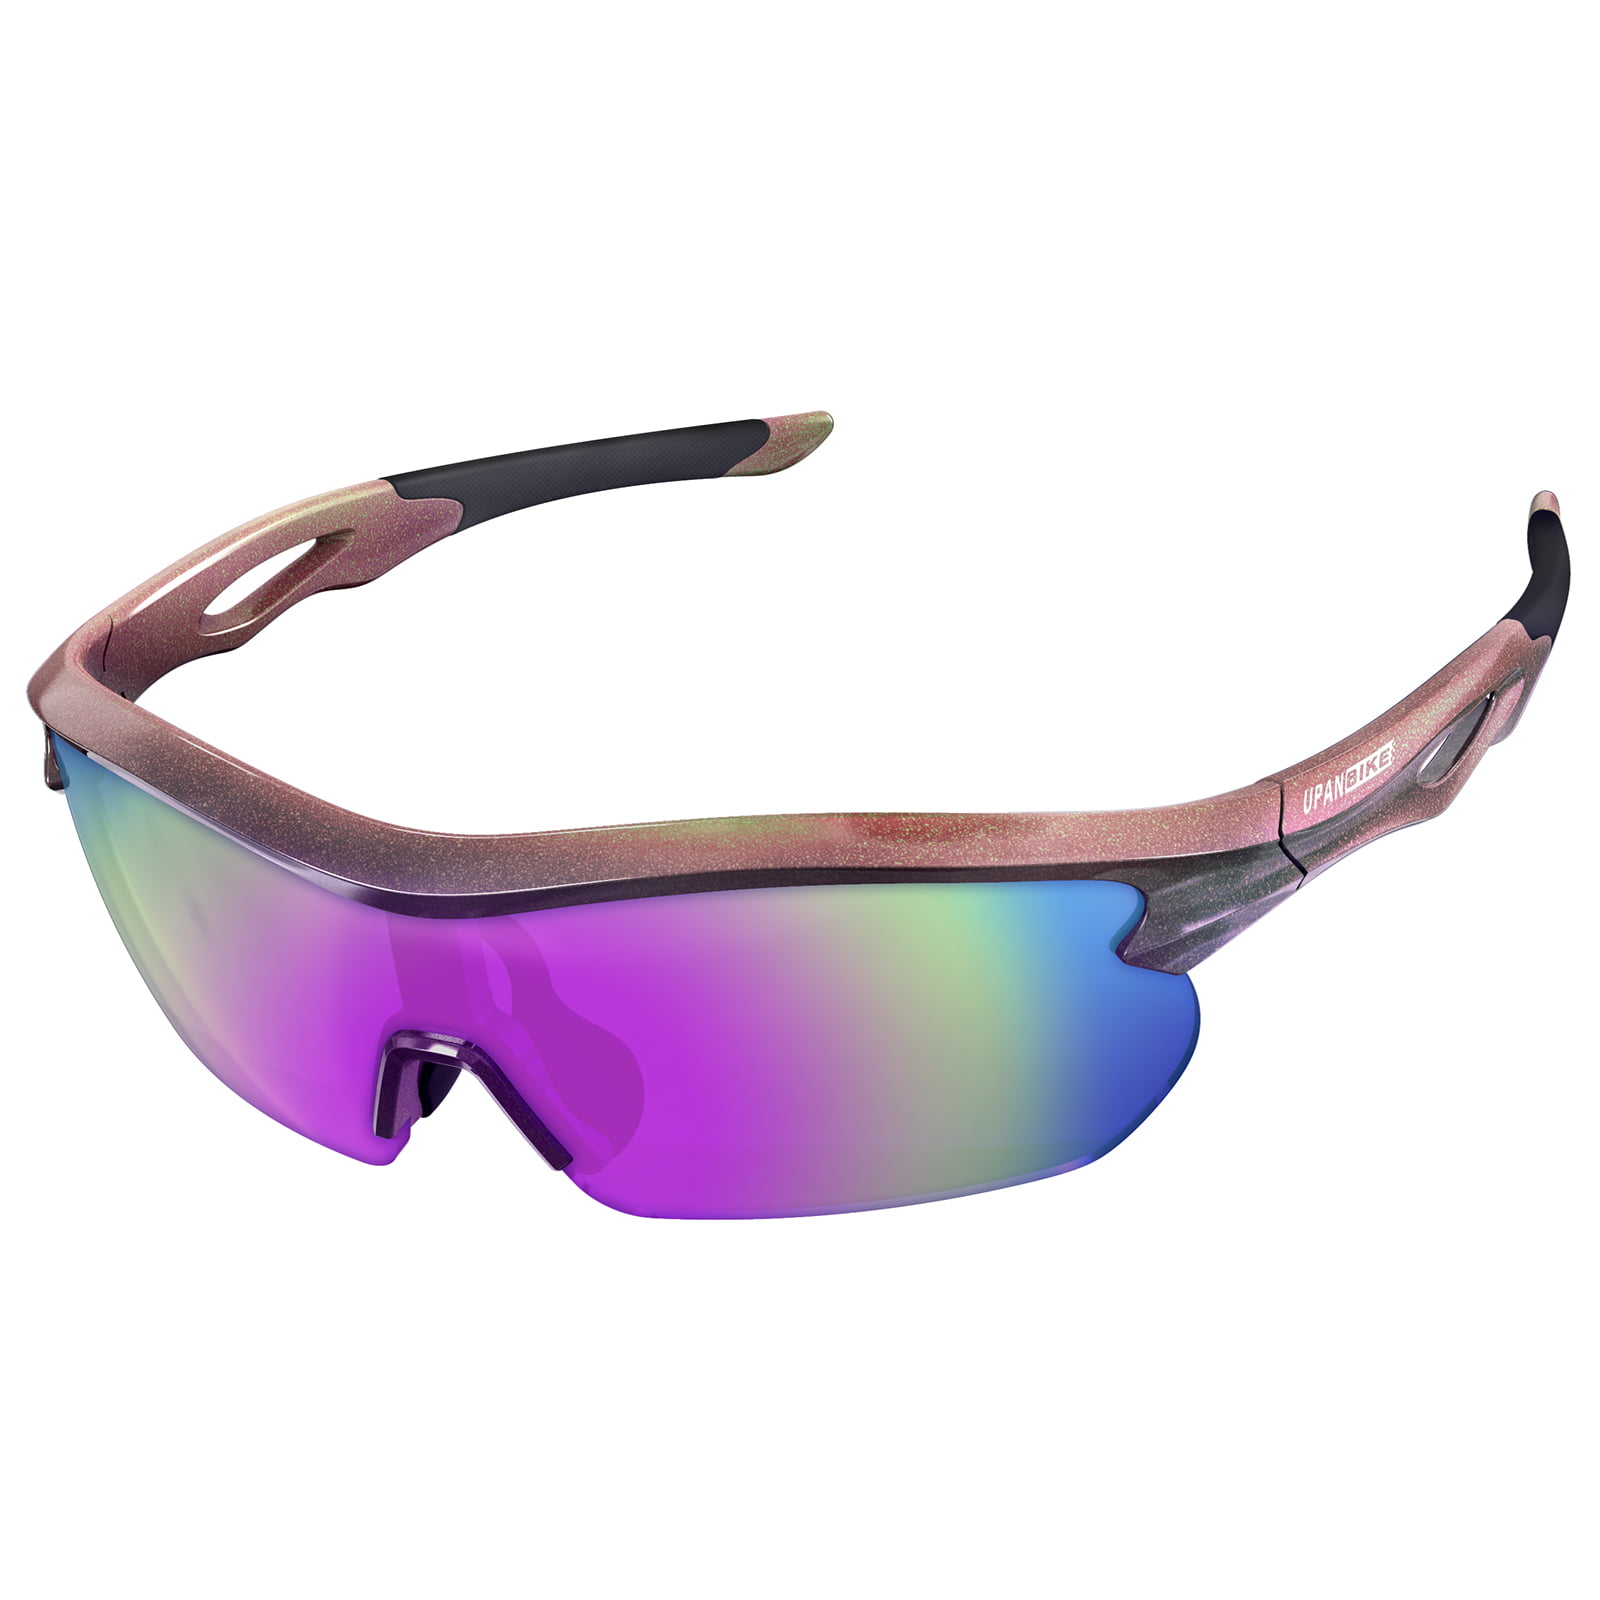 UPANBIKE Cycling Sunglasses UV400 Protection TR90 Unbreakable Frame Sports Sunglasses for Men Women 